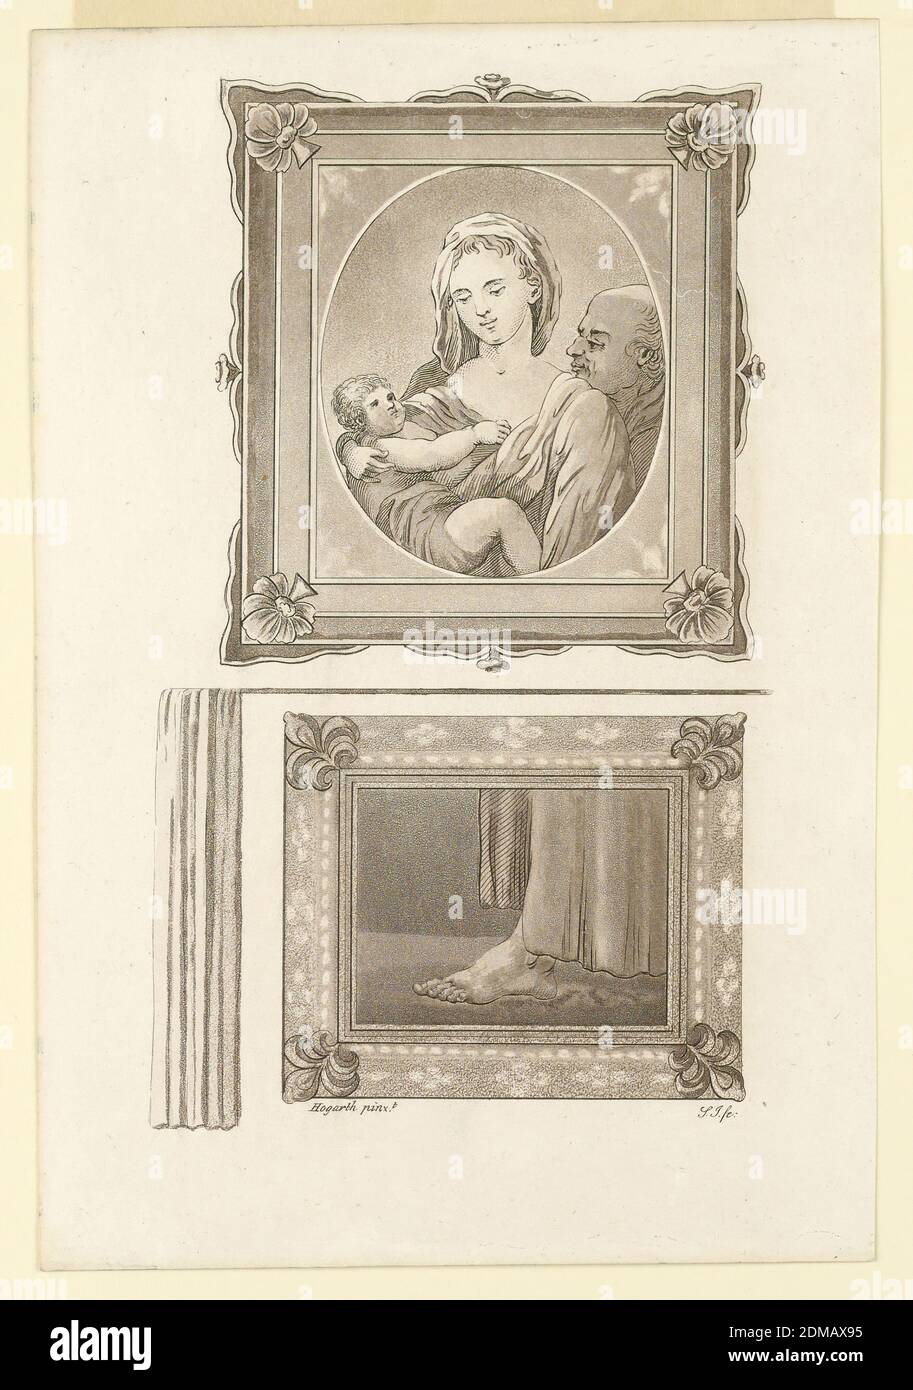 Holy Family, Samuel Ireland, English, ca. 1744–1800, William Hogarth, English, 1697 - 1764, Aquatint on paper, Showing two paintings. The upper one represents the Holy Family. The lower one a foot in side view of a person wearing a long garb. Left of the lower painting a curatin., England, 1794, Print Stock Photo